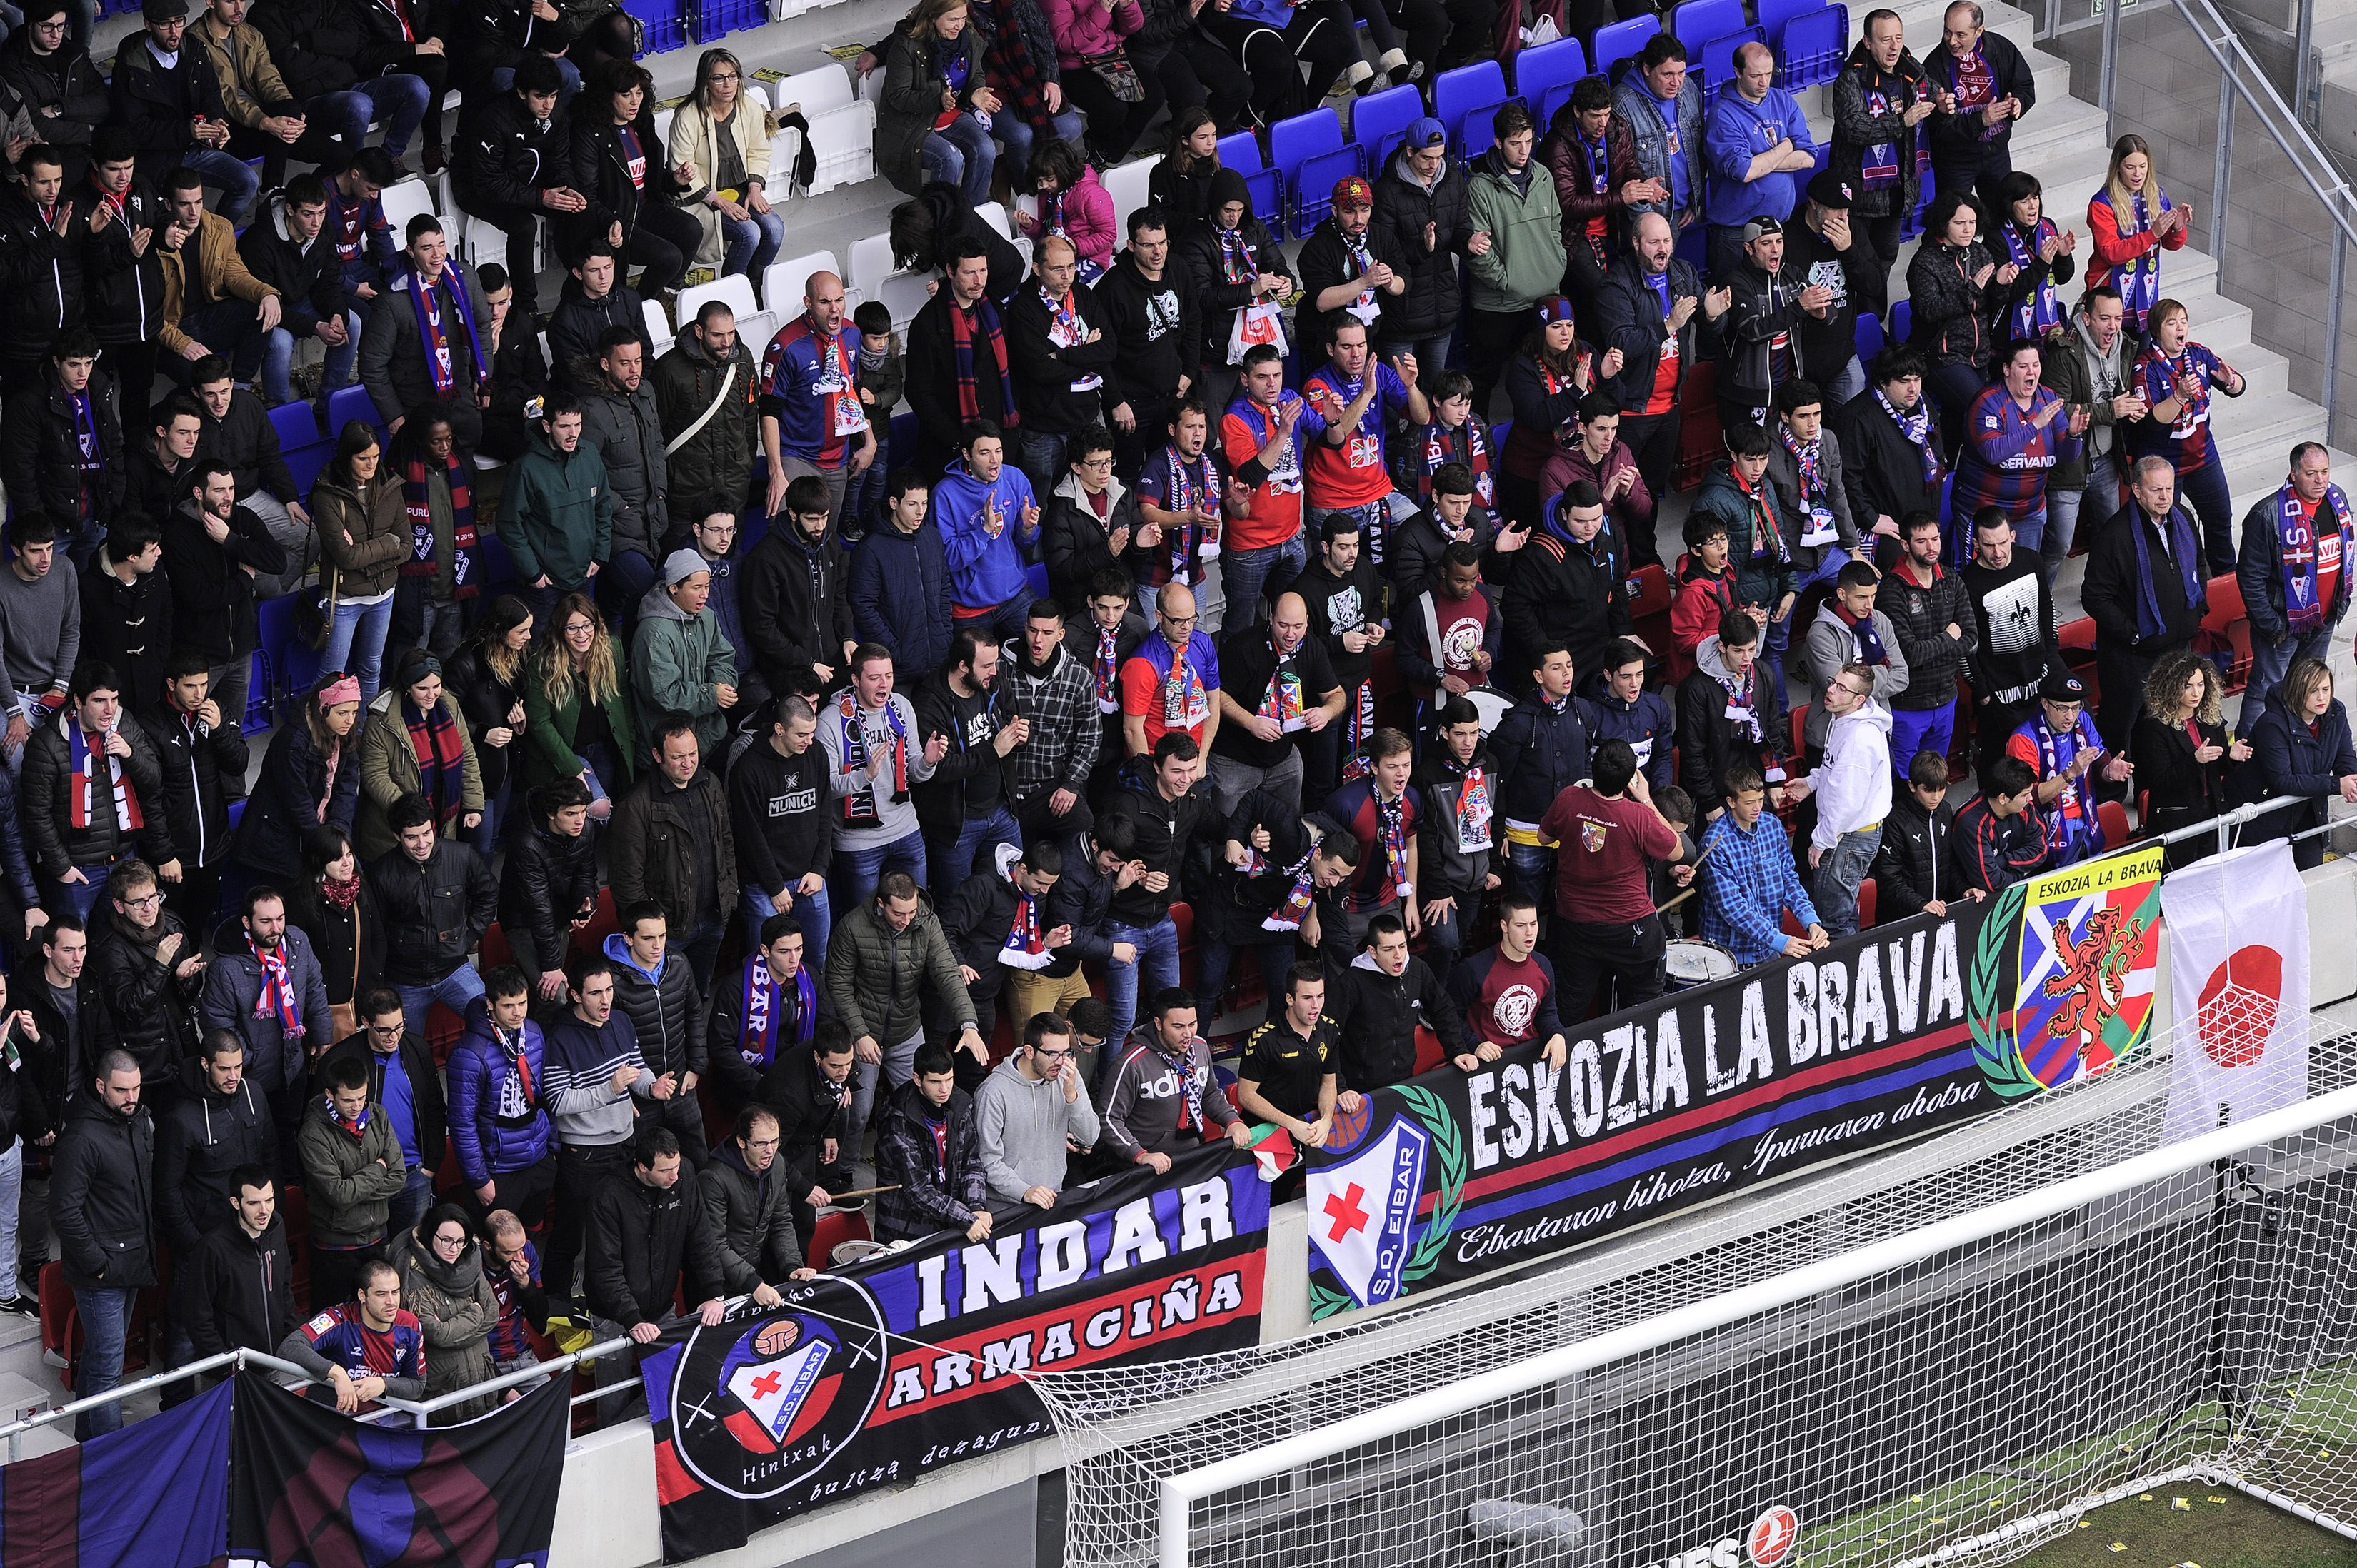 SD Eibar supporters group "Eskozia La Brava" members attend the Spanish league football match SD Eibar vs Deportivo Alaves at the Ipurua stadium in Eibar on December 11, 2016. 
With a stadium of just 6,200 seats surrounded by real estate, a  team that is only five points away from Atletico Madrid's "Cholo" Simeone: welcome to Eibar, a small town in the Basque Country (northern Spain), which boasts that "another football is possible". / AFP / ANDER GILLENEA / TO GO WITH A STORY BY MATHIEU GORSE        (Photo credit should read ANDER GILLENEA/AFP/Getty Images)